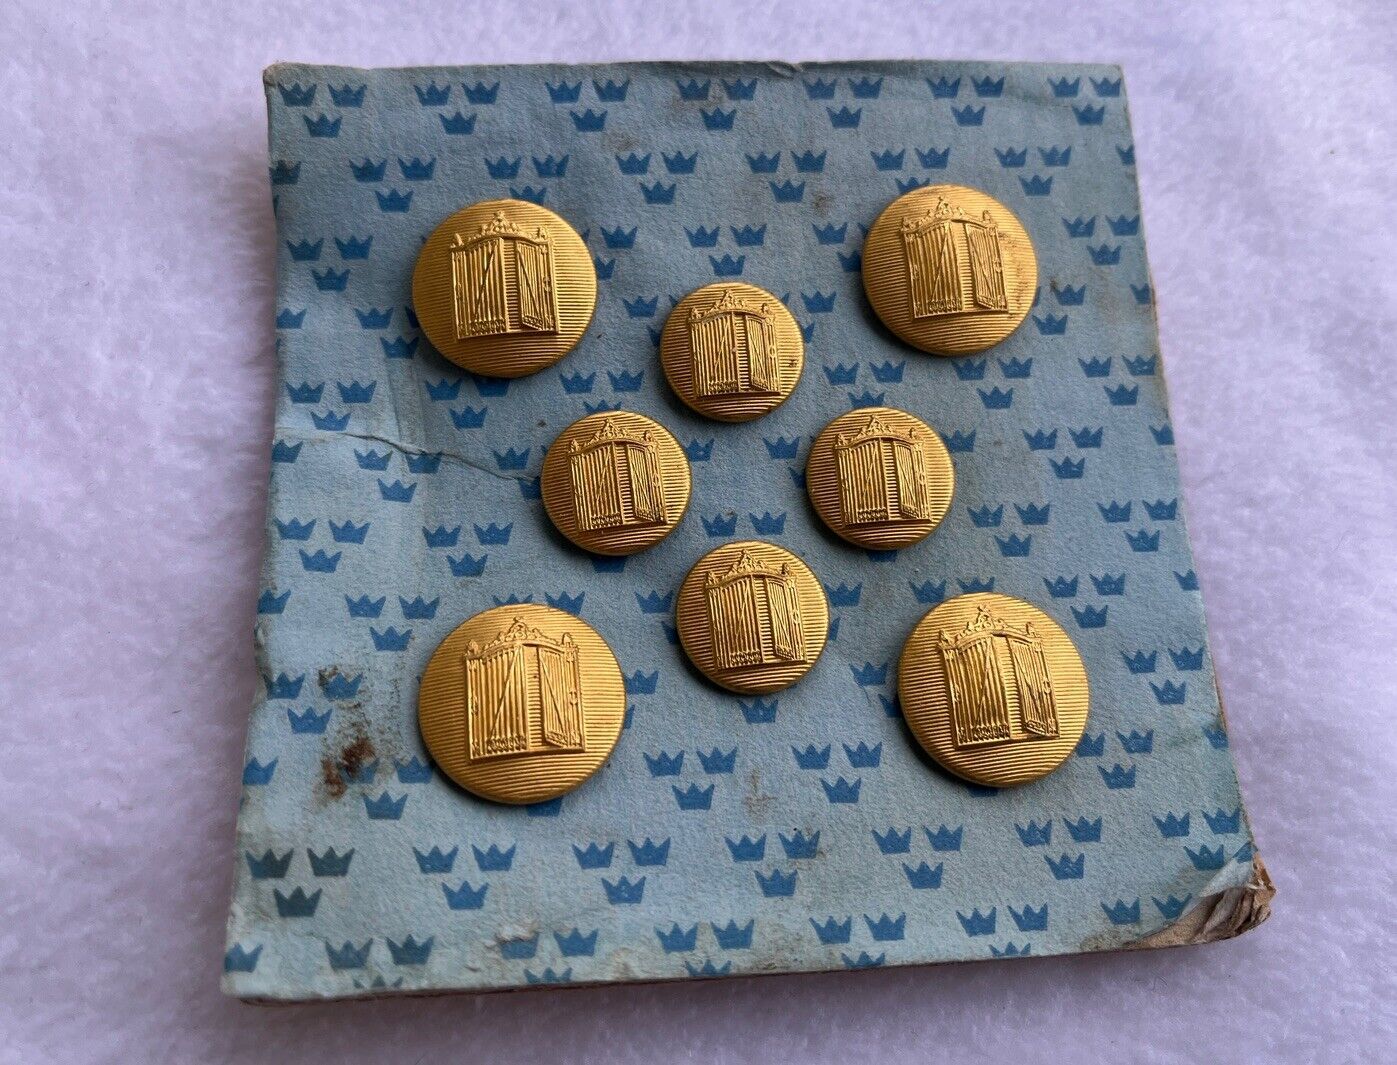 RARE The “21” Club New York City Restaurant Gold Tone Set of 8 Jacket Buttons